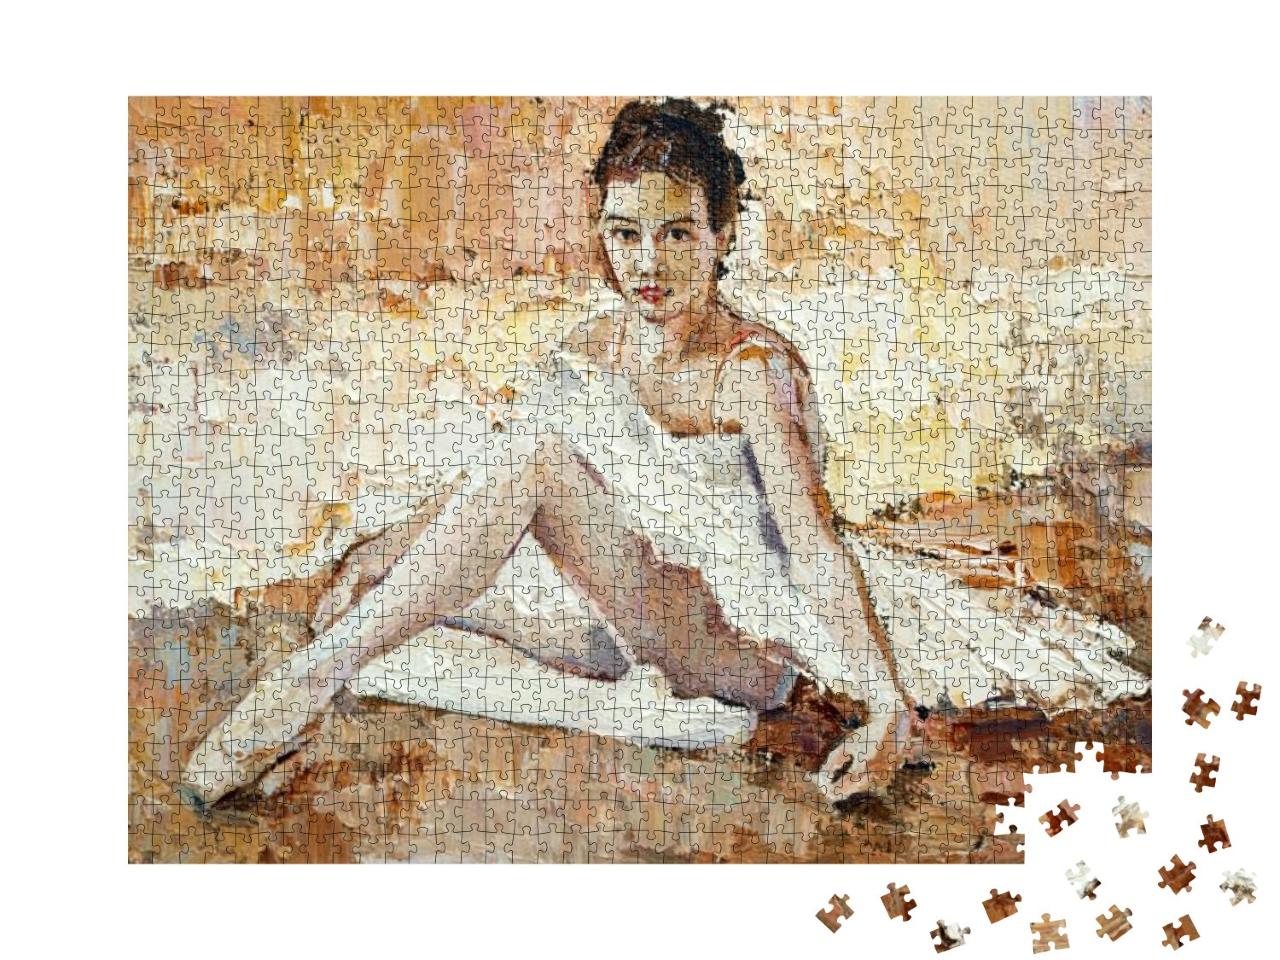 Little Ballerina with Curly Hair Sits & Fastens Pointe Sh... Jigsaw Puzzle with 1000 pieces